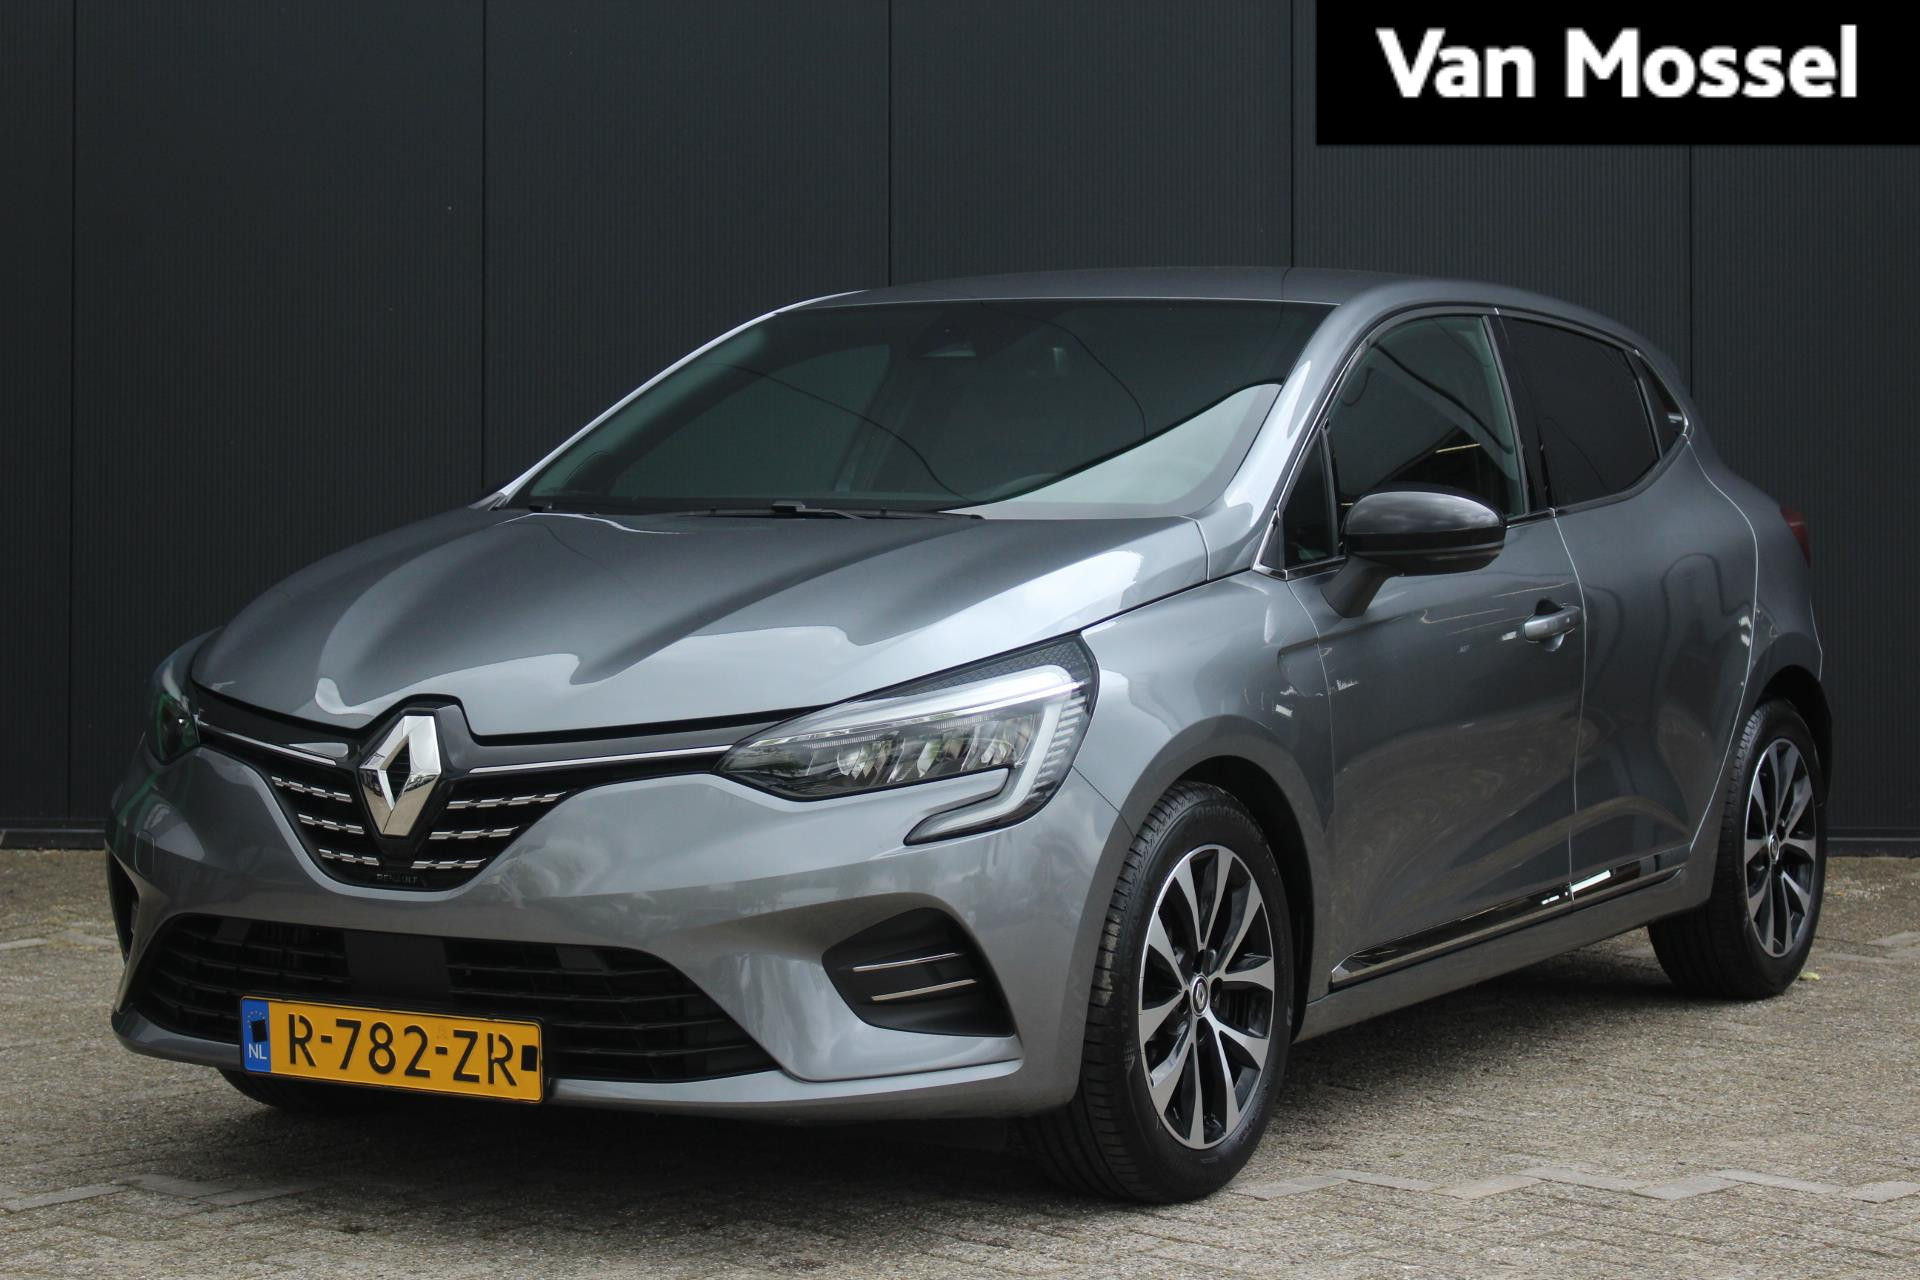 Renault Clio 1.0 TCe 90Pk Techno | Navigatie | Apple & Android Carplay | Climate Control | Parkeersensoren Achter | Camera | Privacy Glass | Cruise Control |